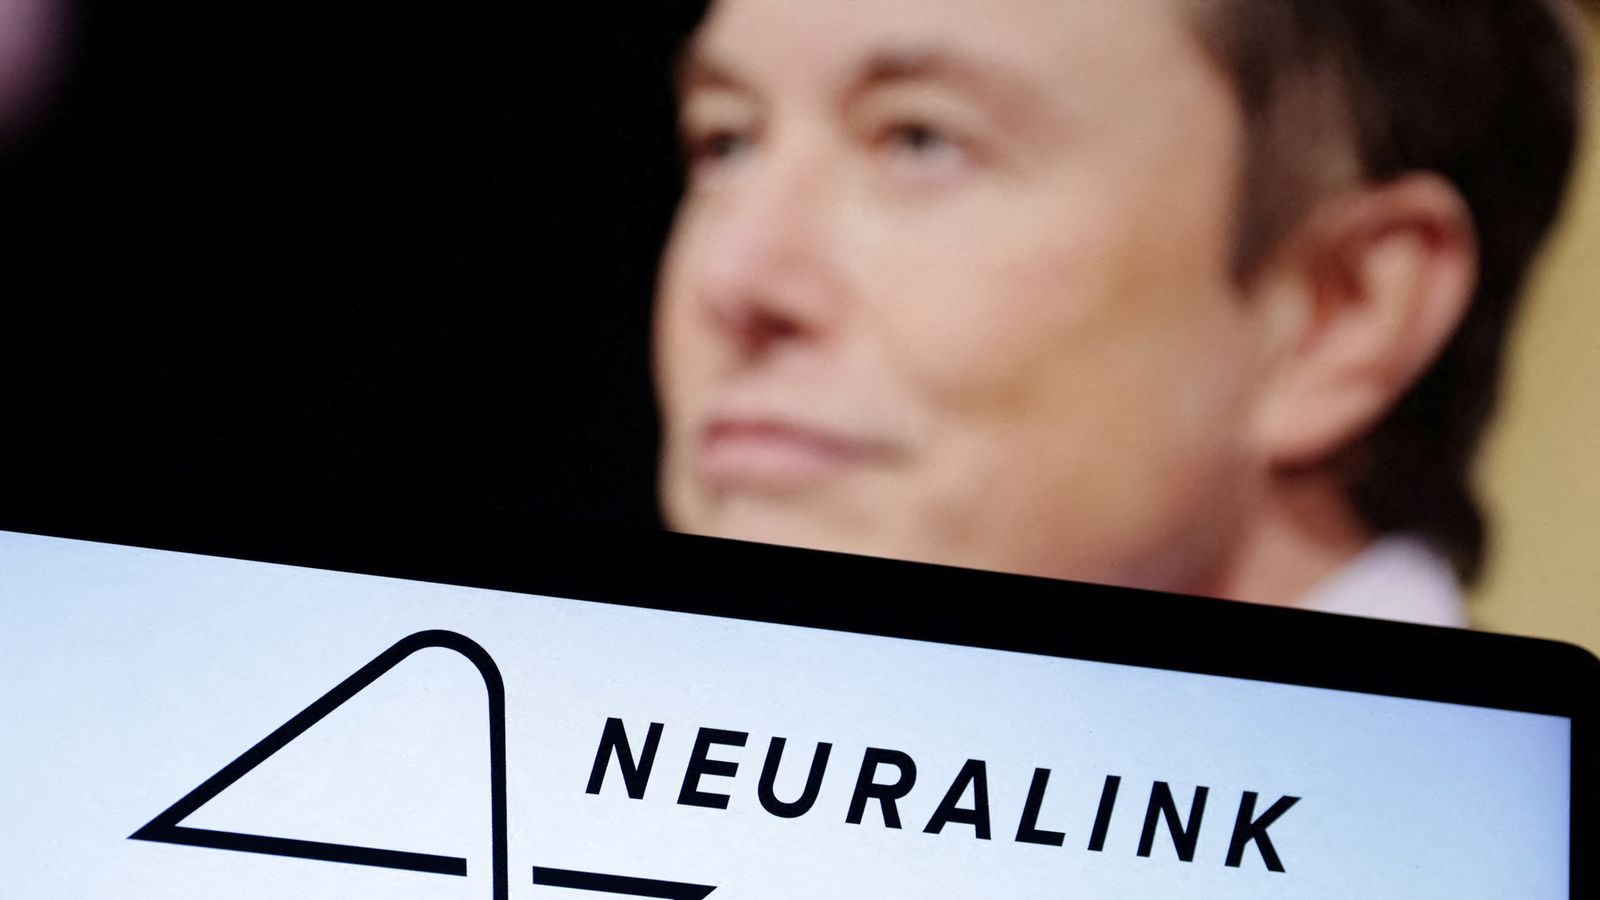 Elon Musk's brain chip firm given all-clear to recruit for human trials